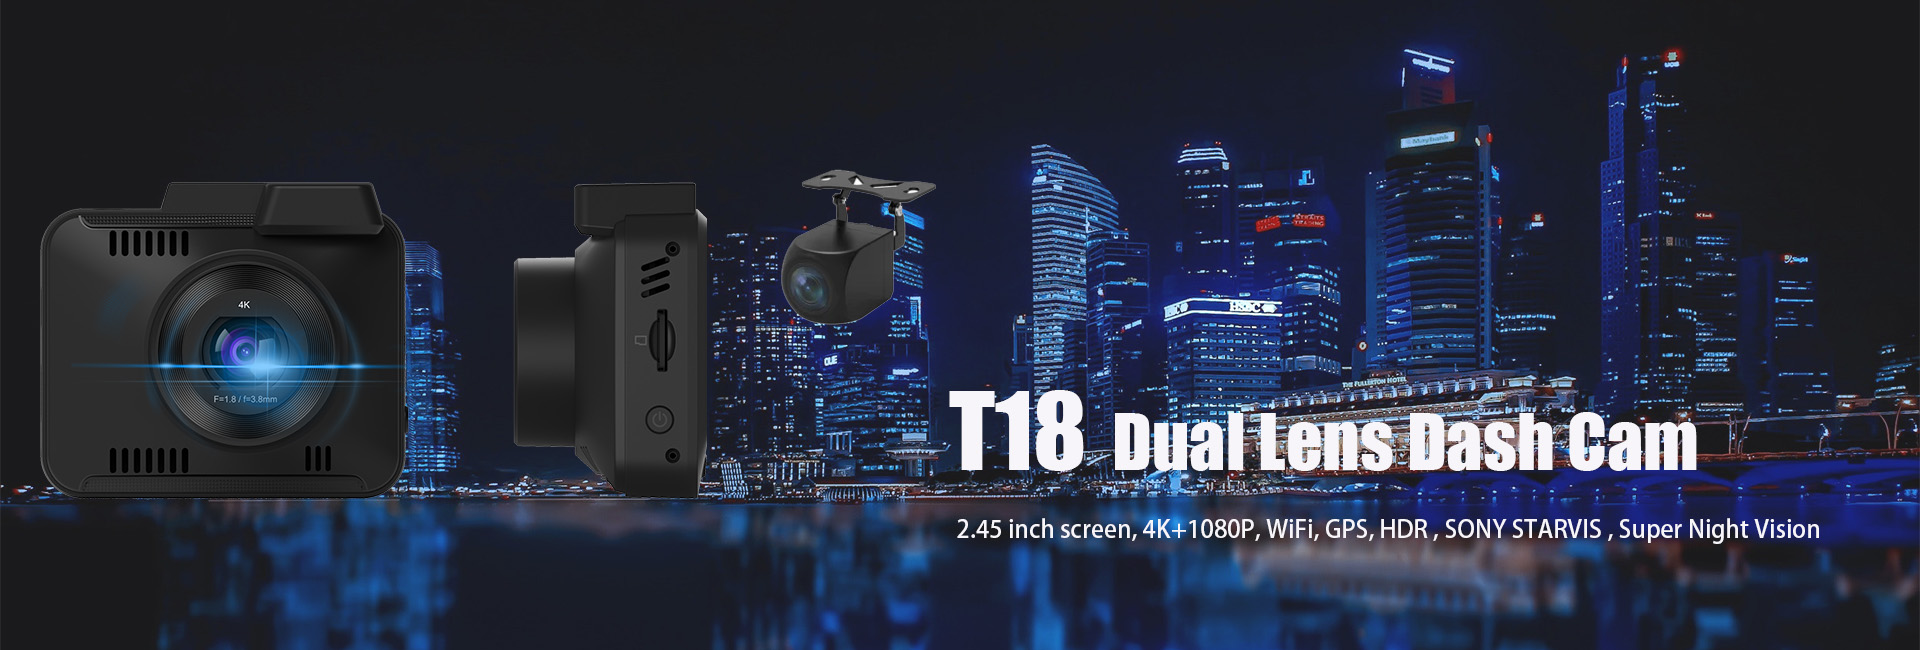 T18 Dual Lens Dash Cam 4K+1080P With HDR function